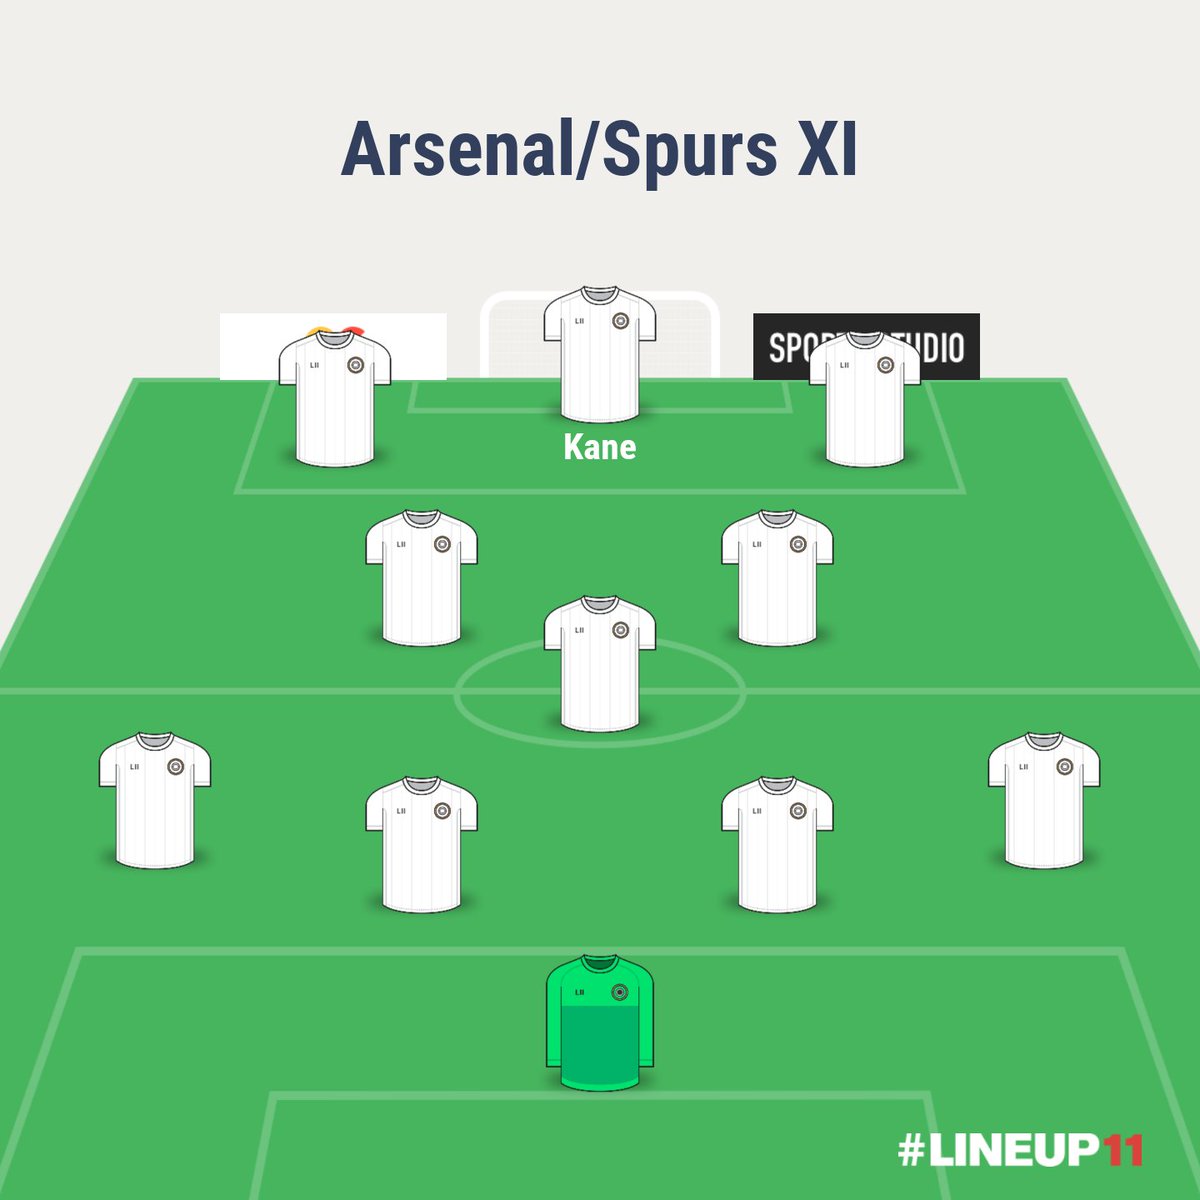 Thoughts on this combined Arsenal and Spurs XI I put together? https://t.co/AEkfUo6Nvf